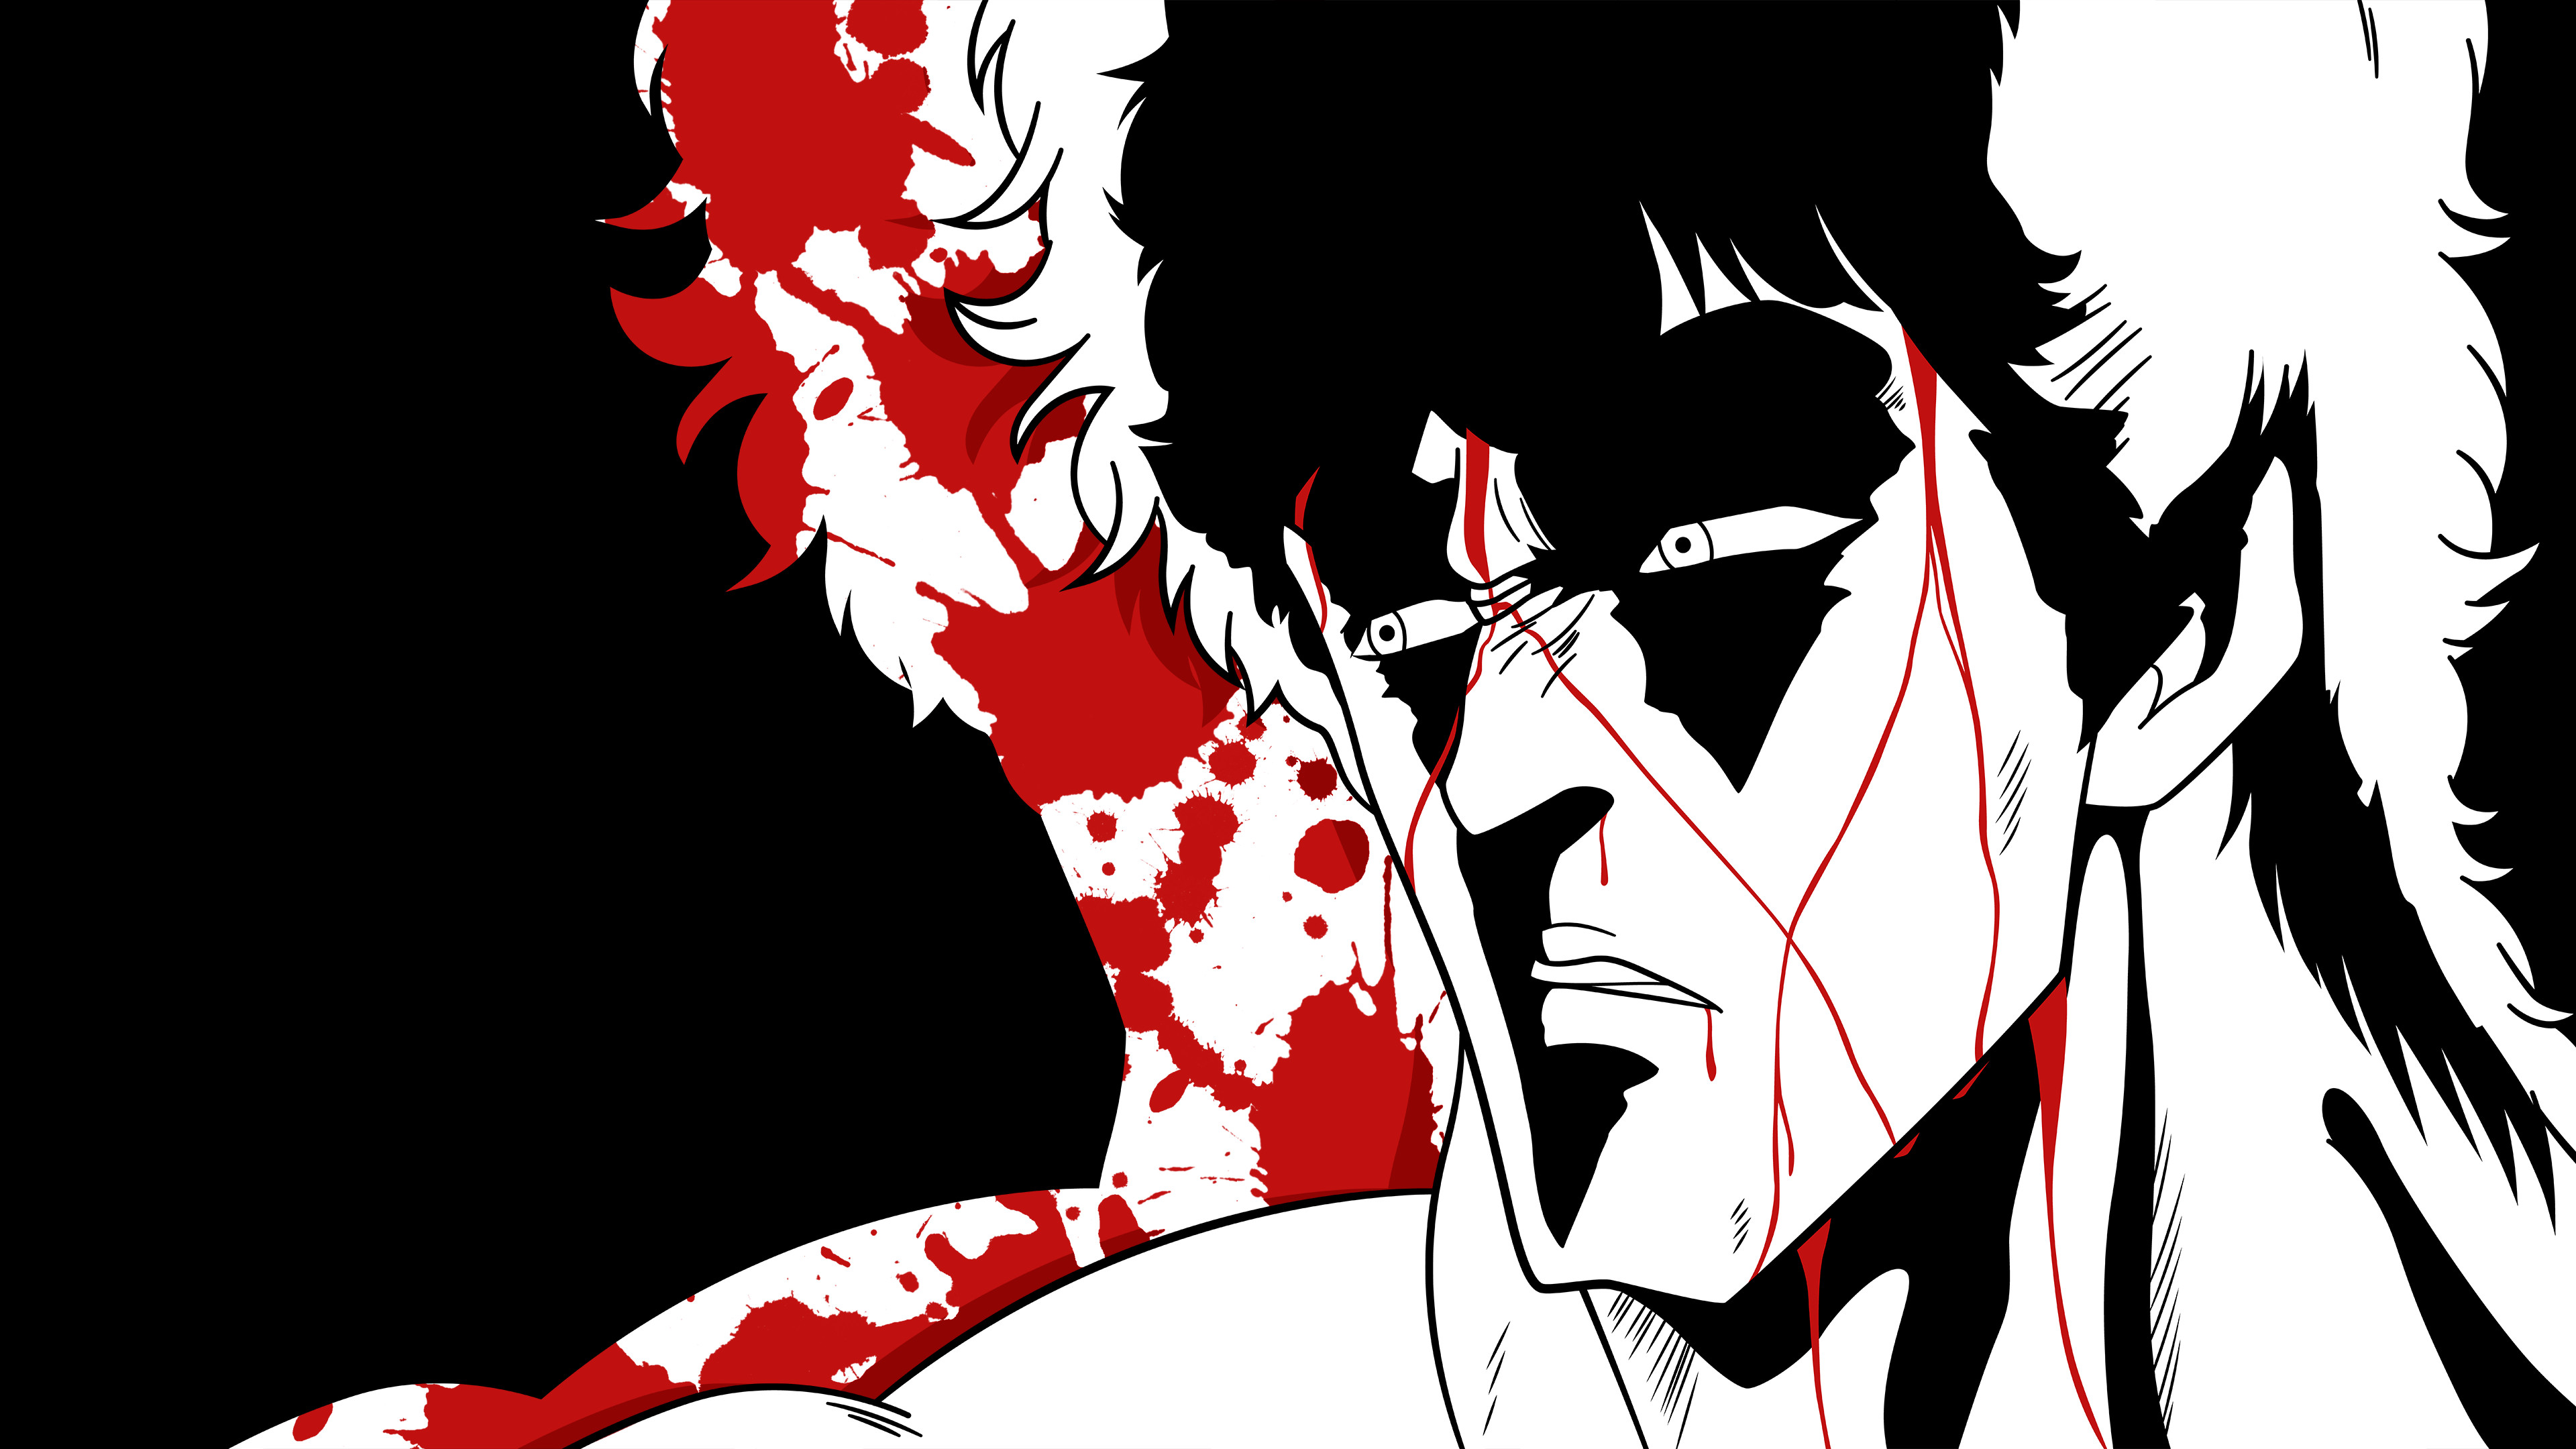 kenshiro wallpaper,red,illustration,graphic design,fictional character,mouth